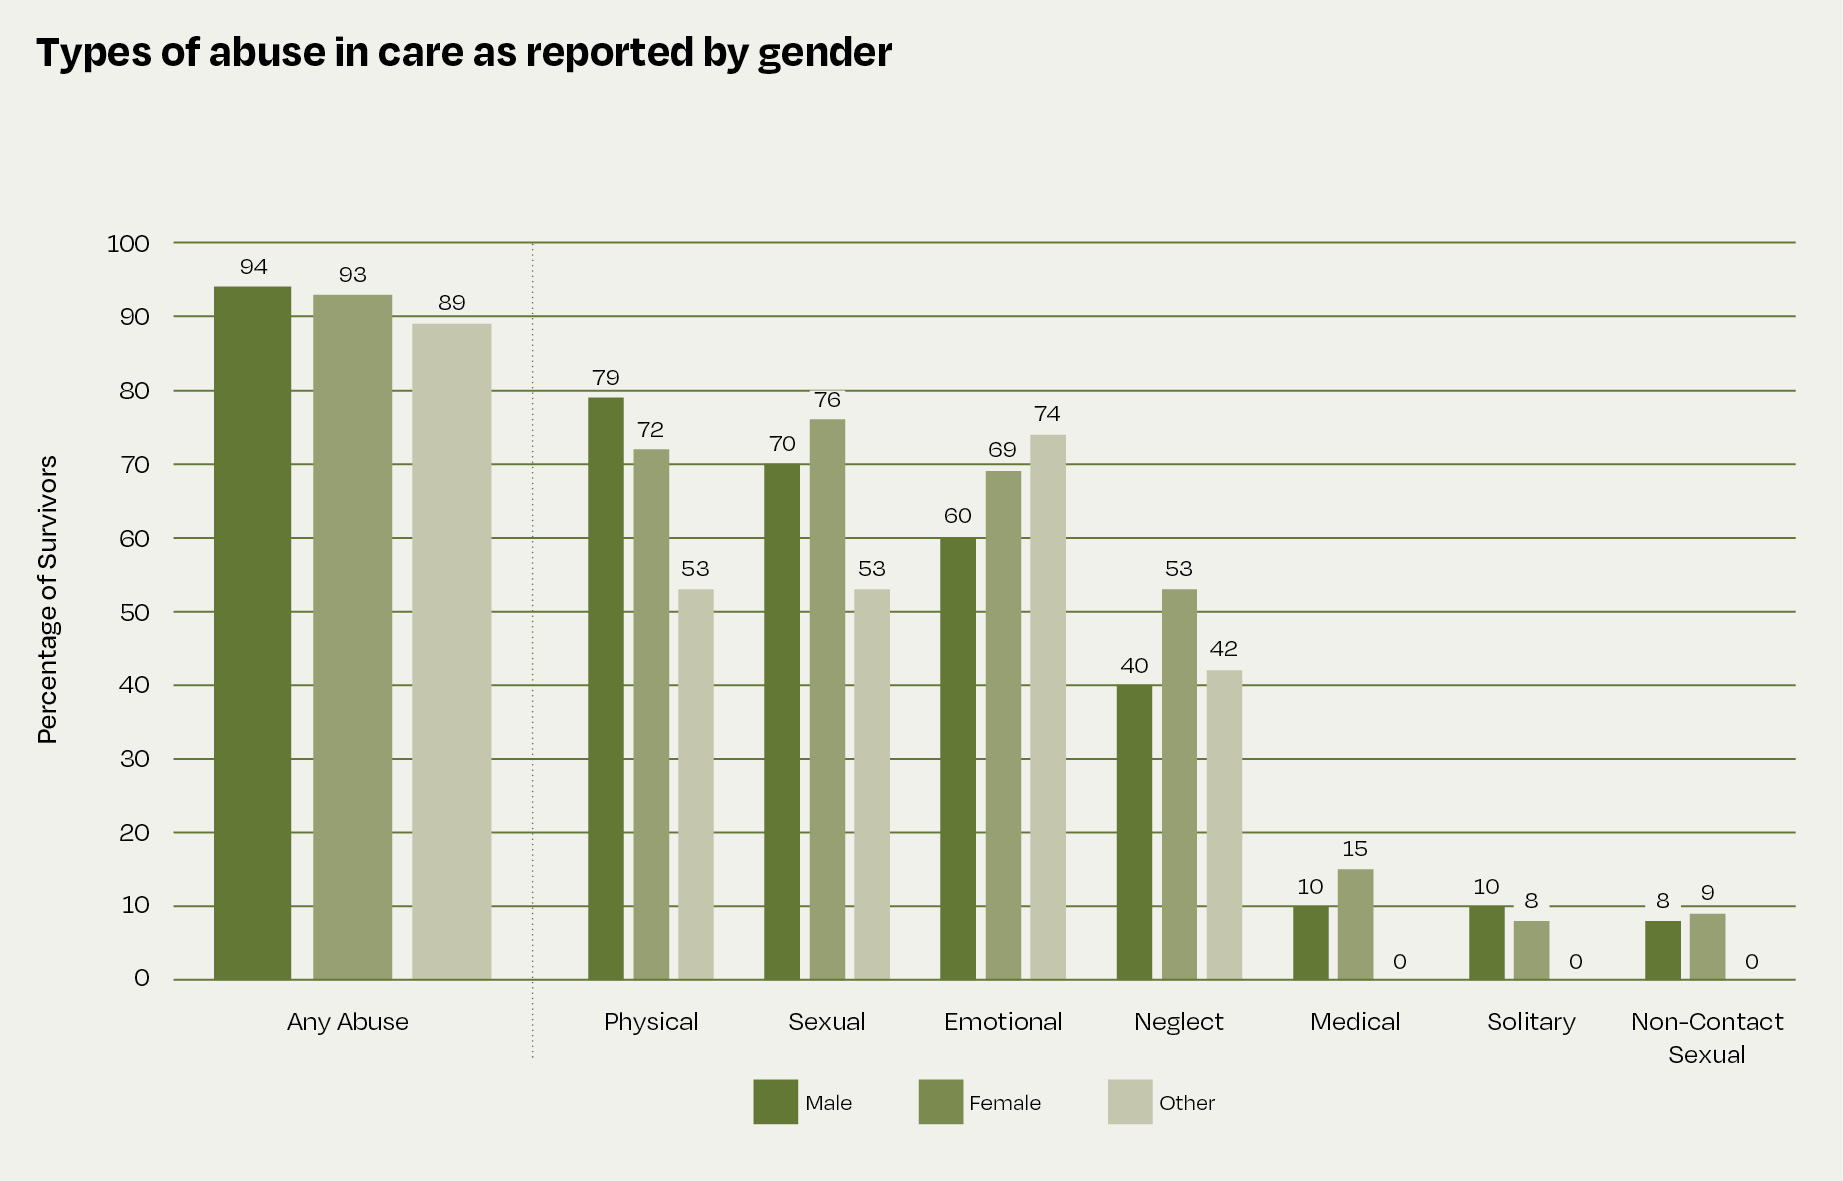 This bar graph shows the types of abuse experienced by different genders in care. Genders are male, female and other. Types of abuse are listed in the order they were most likely to be experienced: any abuse, physical, sexual, emotional, neglect, medical, solitary and non-contact sexual. Any abuse was experienced by 94 percent of male survivors, 93 percent of female survivors and 89 percent of other survivors; physical abuse was experienced by 79 percent of males, 72 percent of females and 53 percent of others; sexual abuse was experienced by 70 percent of males, 76 percent of females and 53 percent of others; emotional abuse was experienced by 60 percent of males, 69 percent of female and 74 of others; neglect was experienced by 40 percent of males, 53 percent of females and 42 percent of others; medical abuse was experienced by 10 percent of males and 15 percent of females; solitary was experienced by 10 percent of males and 8 percent of females; non-contact sexual abuse was experienced by 8 percent of males and 9 percent of females.